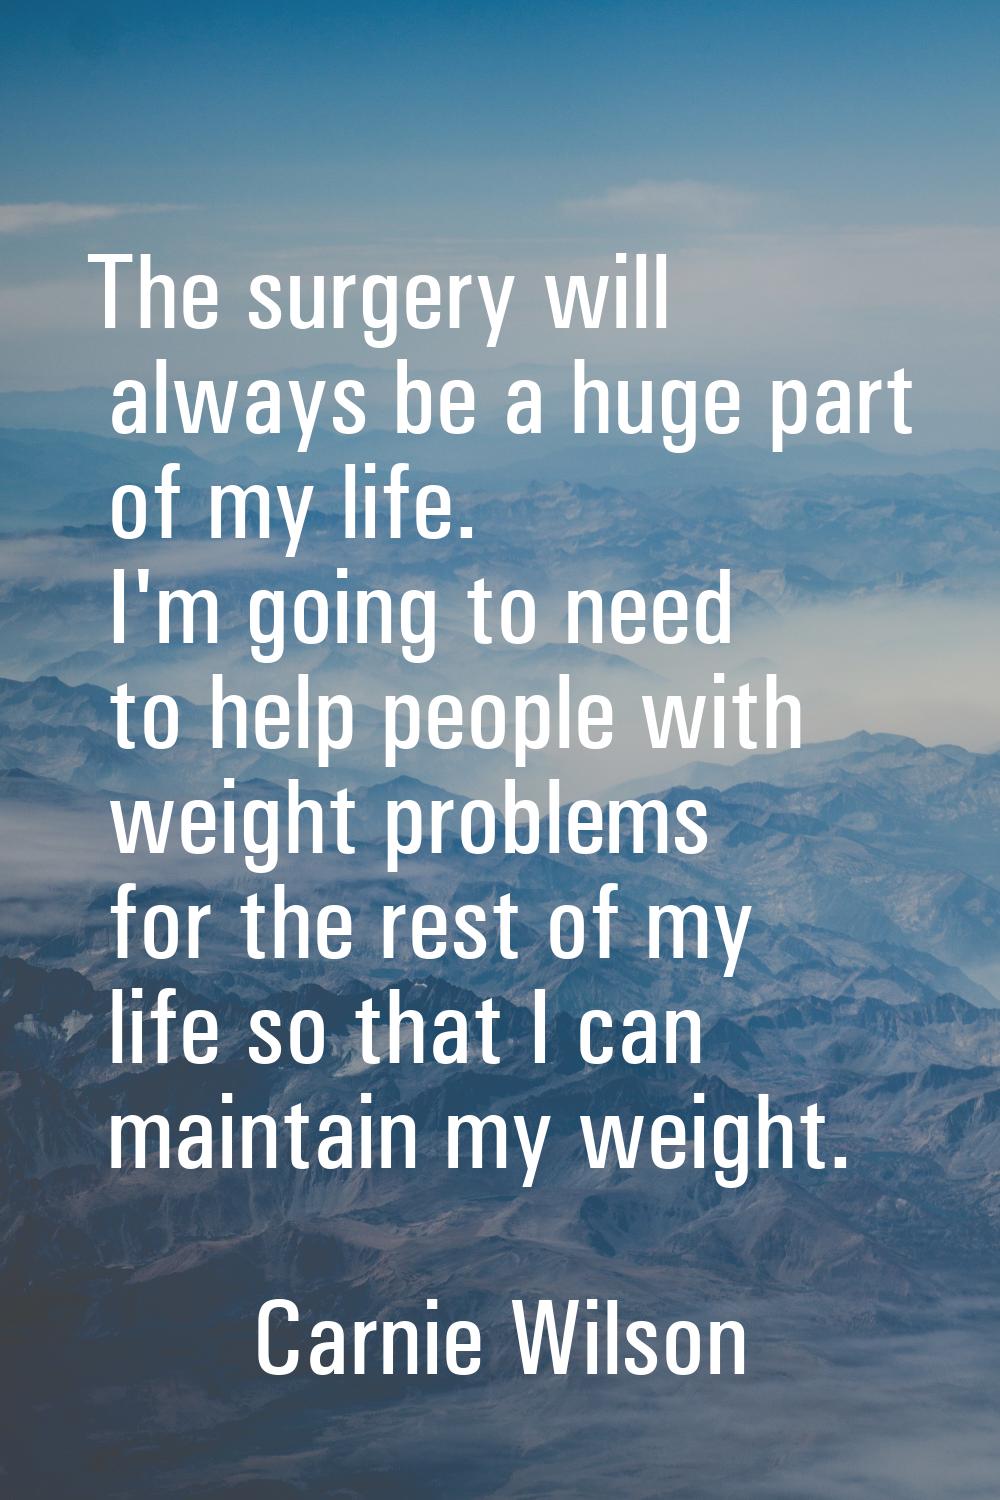 The surgery will always be a huge part of my life. I'm going to need to help people with weight pro